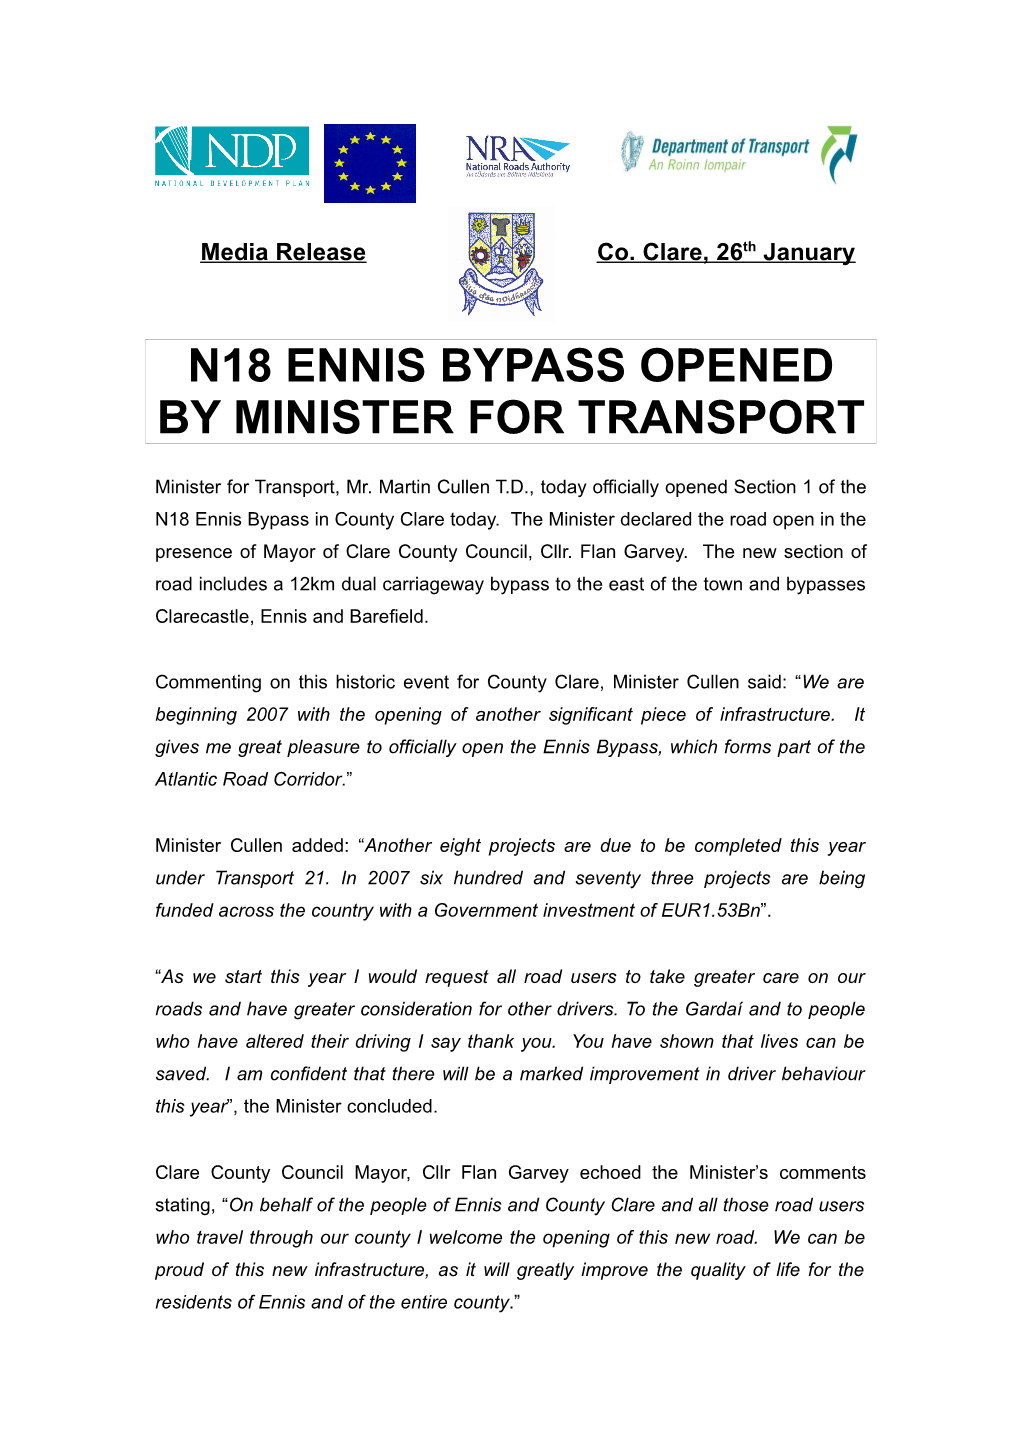 N18 Ennis Bypass Opened by Minister for Transport